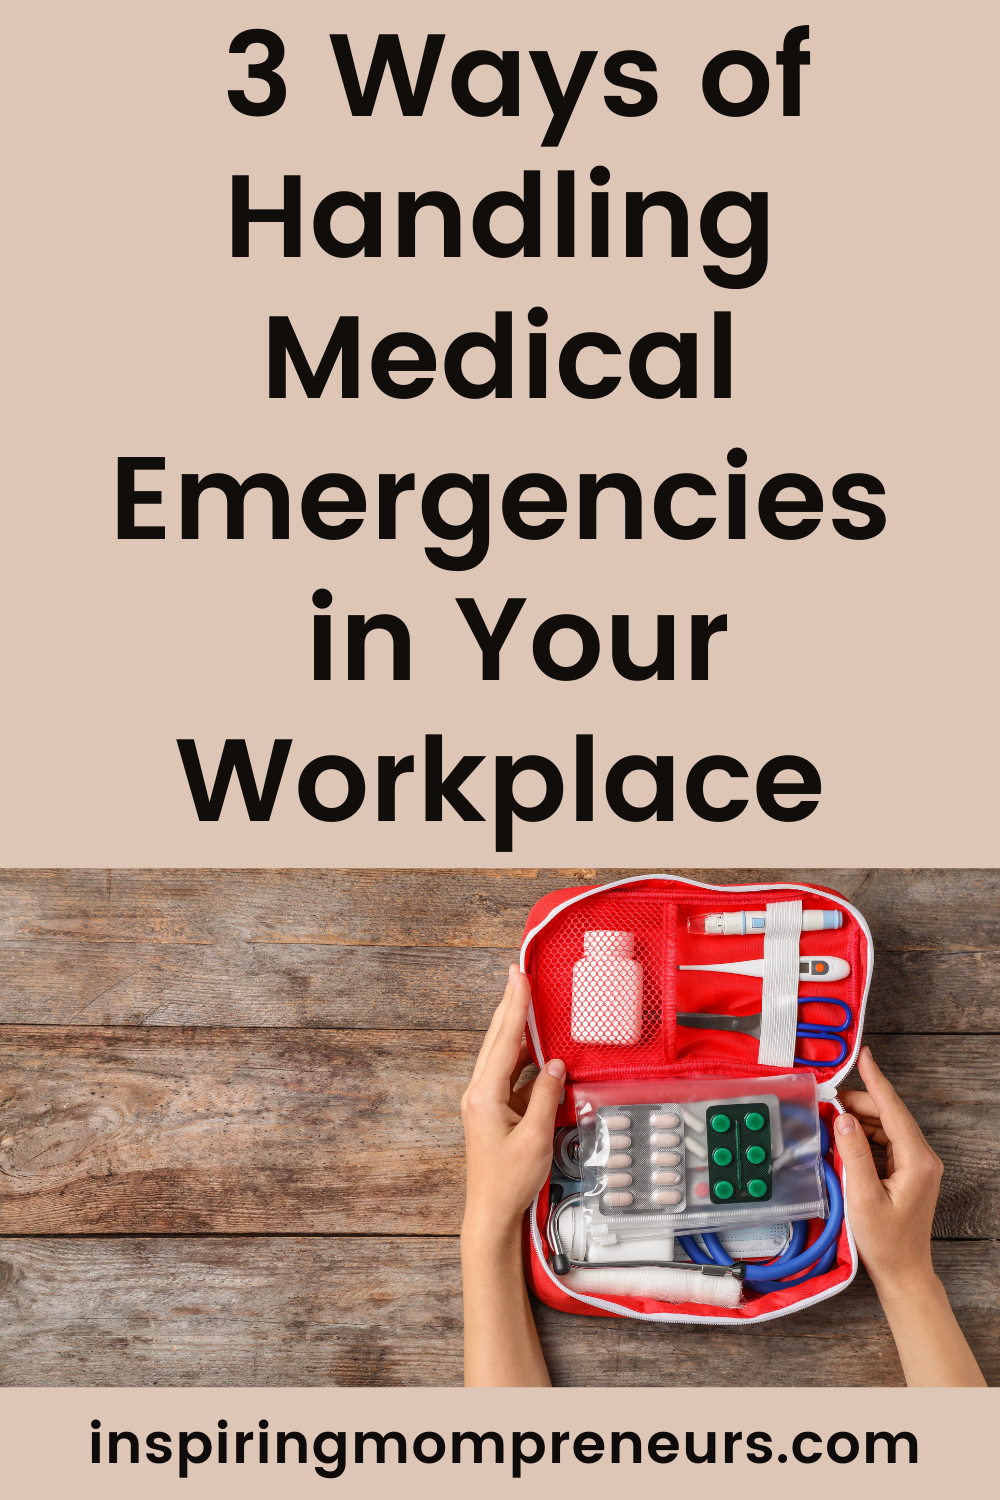 There is usually something positive you can do in the event of an emergency at work. Here are 3 ways of handling medical emergencies in the workplace. 